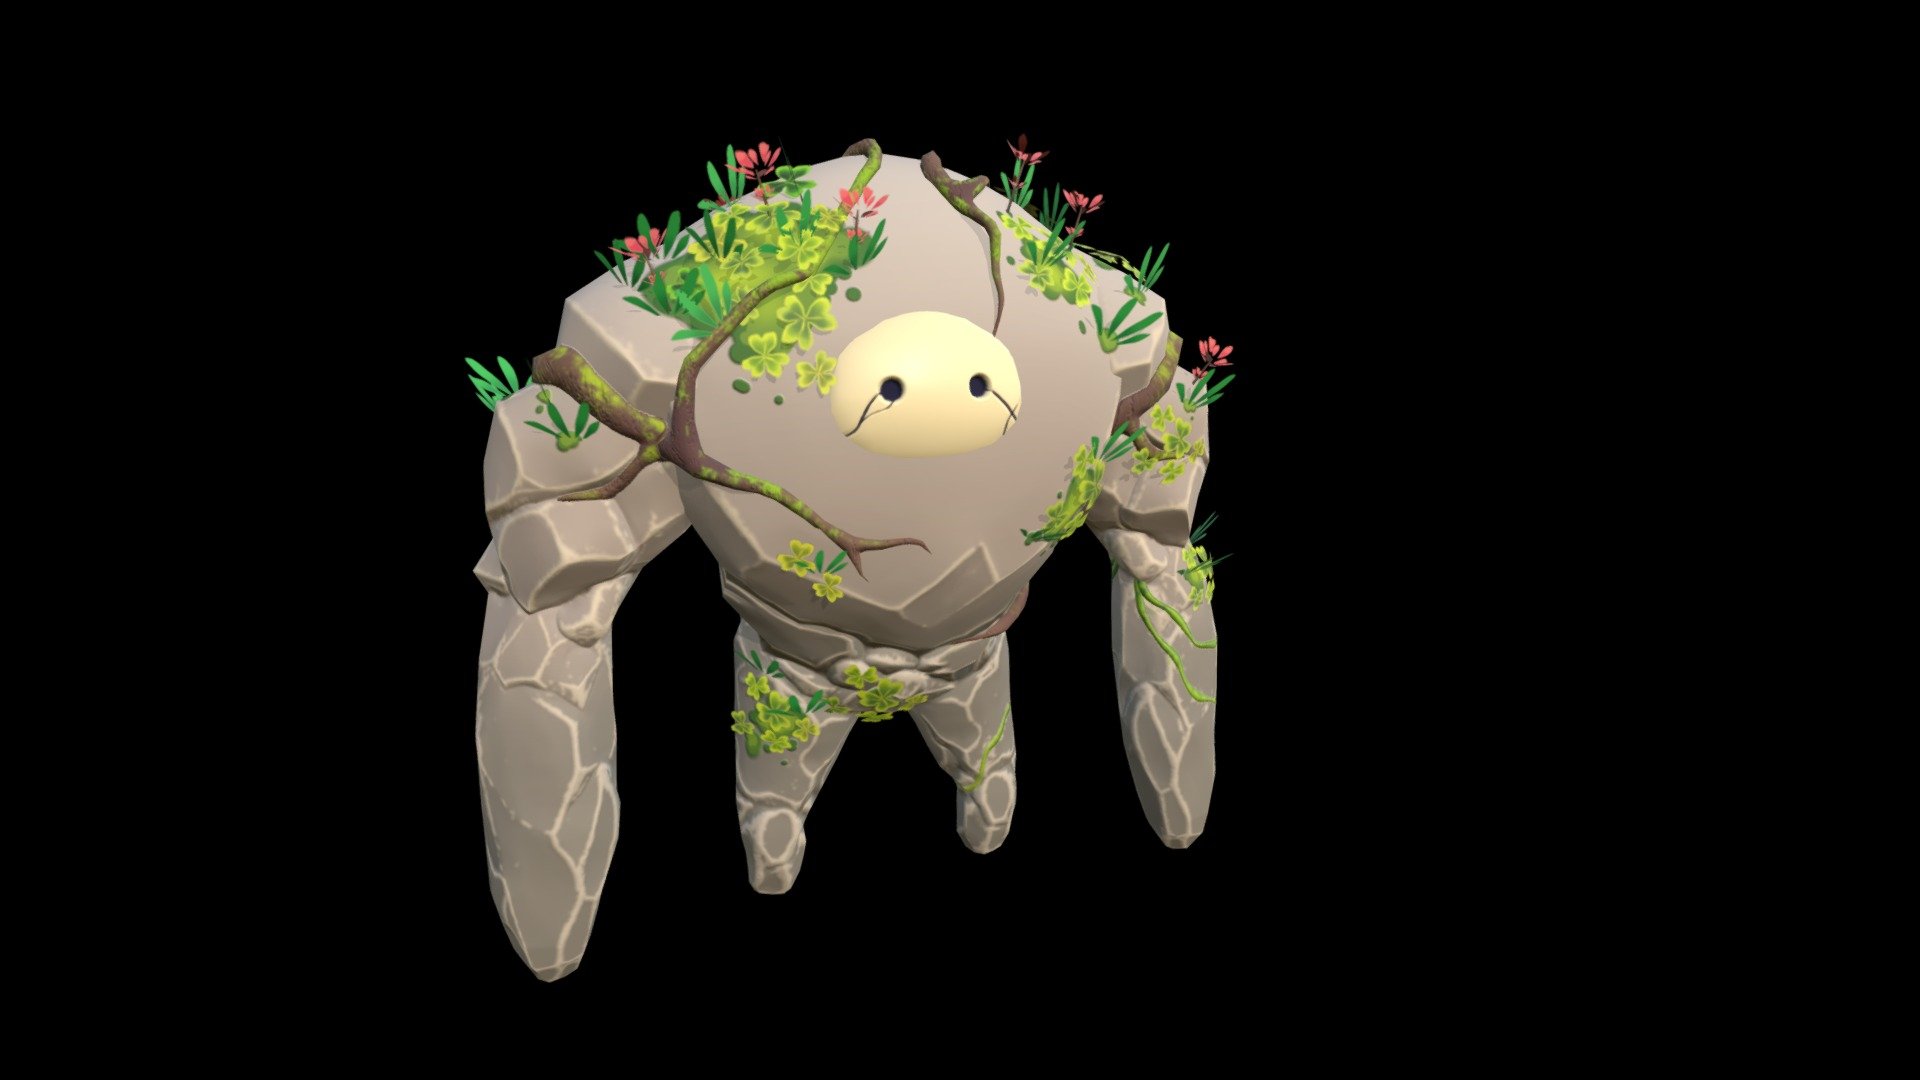 Spring Golem ! Made after indie game Ary and the Secrets of Seasons :)
https://ary-game.com/
(May not actually be a spring golem)

I did this one under a tight shedule, still happy with the result but I wish I could have dwelded further unto it 3d model